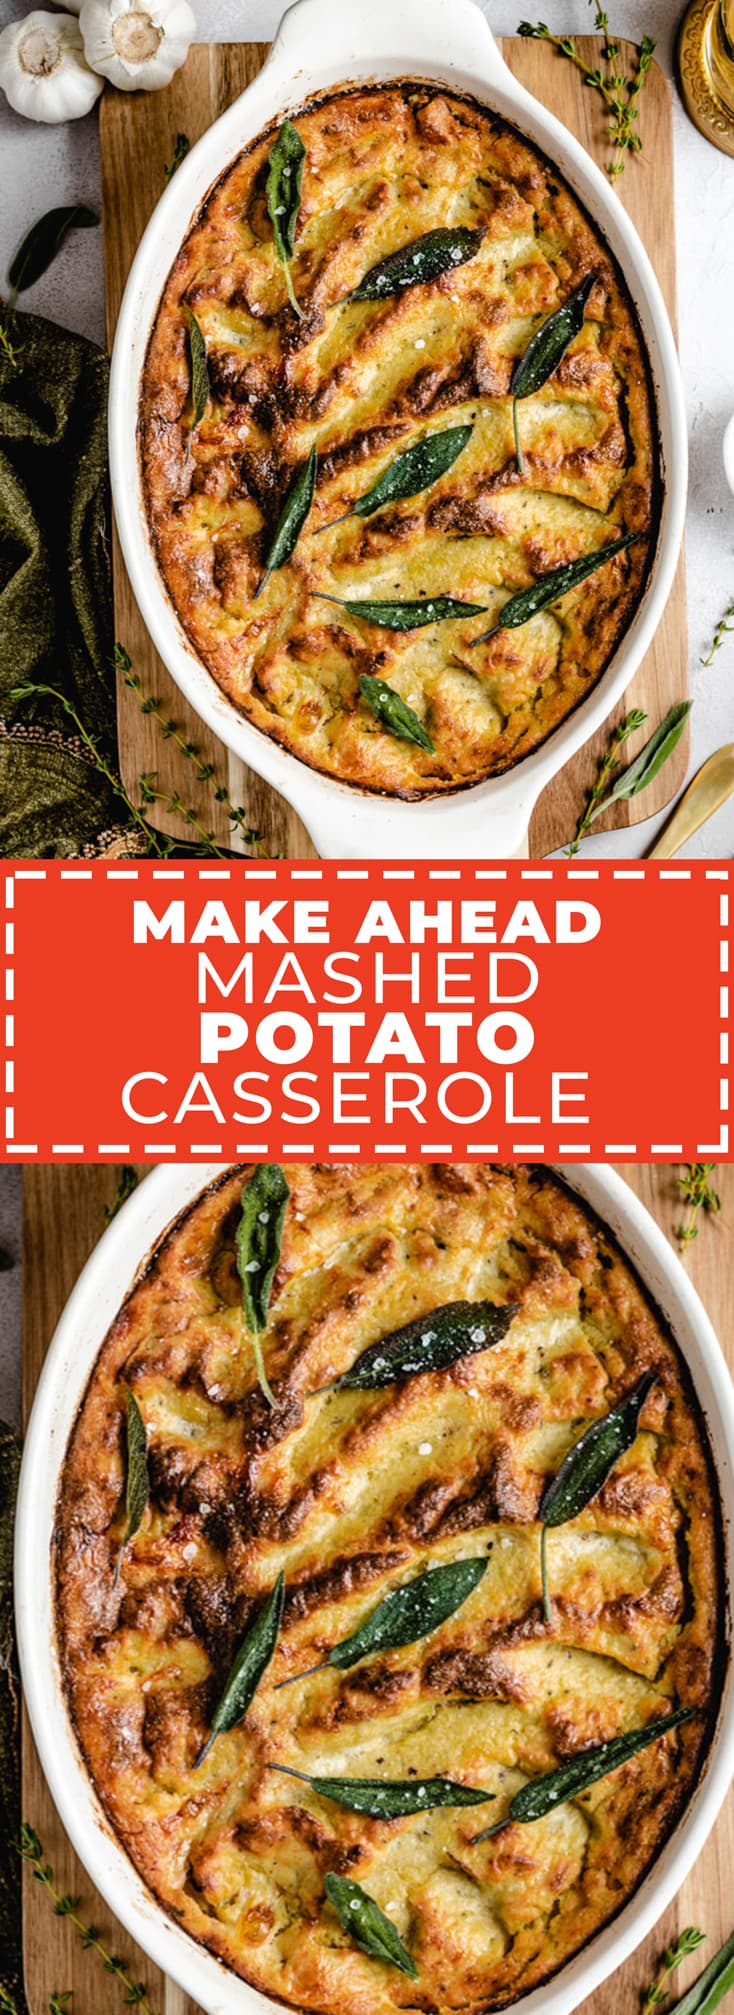 This Make-Ahead Mashed Potato Casserole is a holiday miracle. Cooked in herbed half-and-half and topped with fried sage, you’ll swoon over the crispy-yet-creamy texture as much as all of the avoided last-minute stress.  | hostthetoast.com